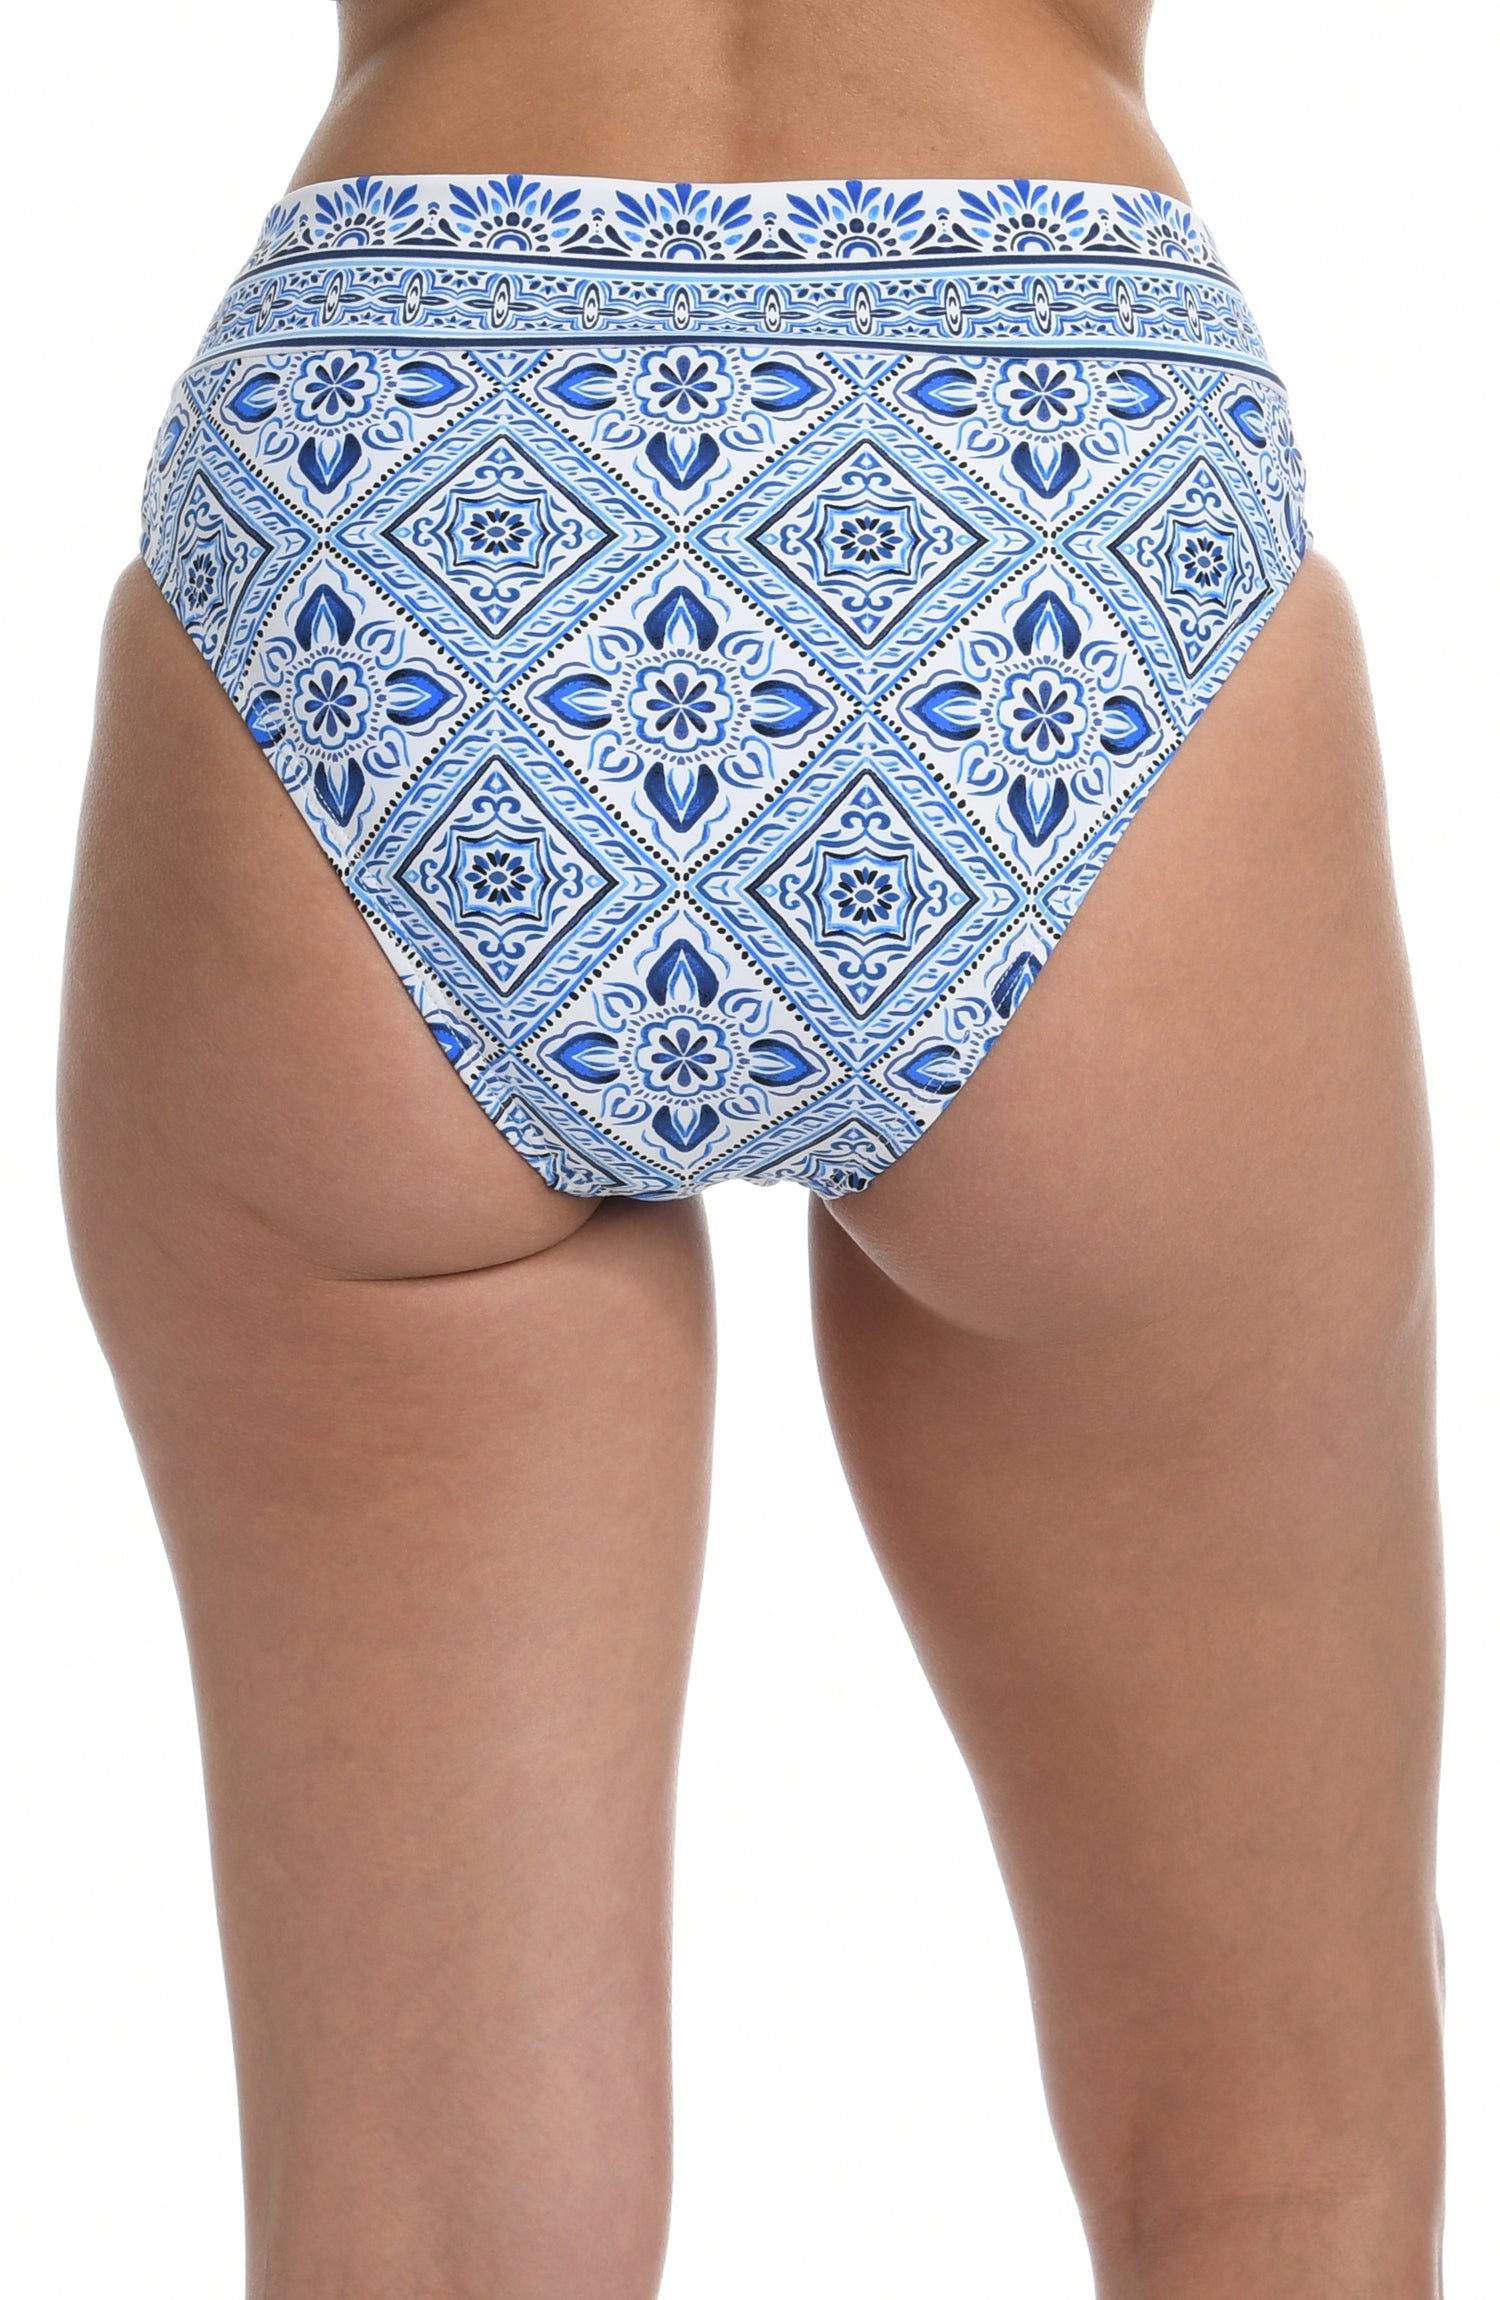 Model is wearing a light blue artful mosaic printed high waist swimsuit bottom from our Mediterranean Breeze collection.